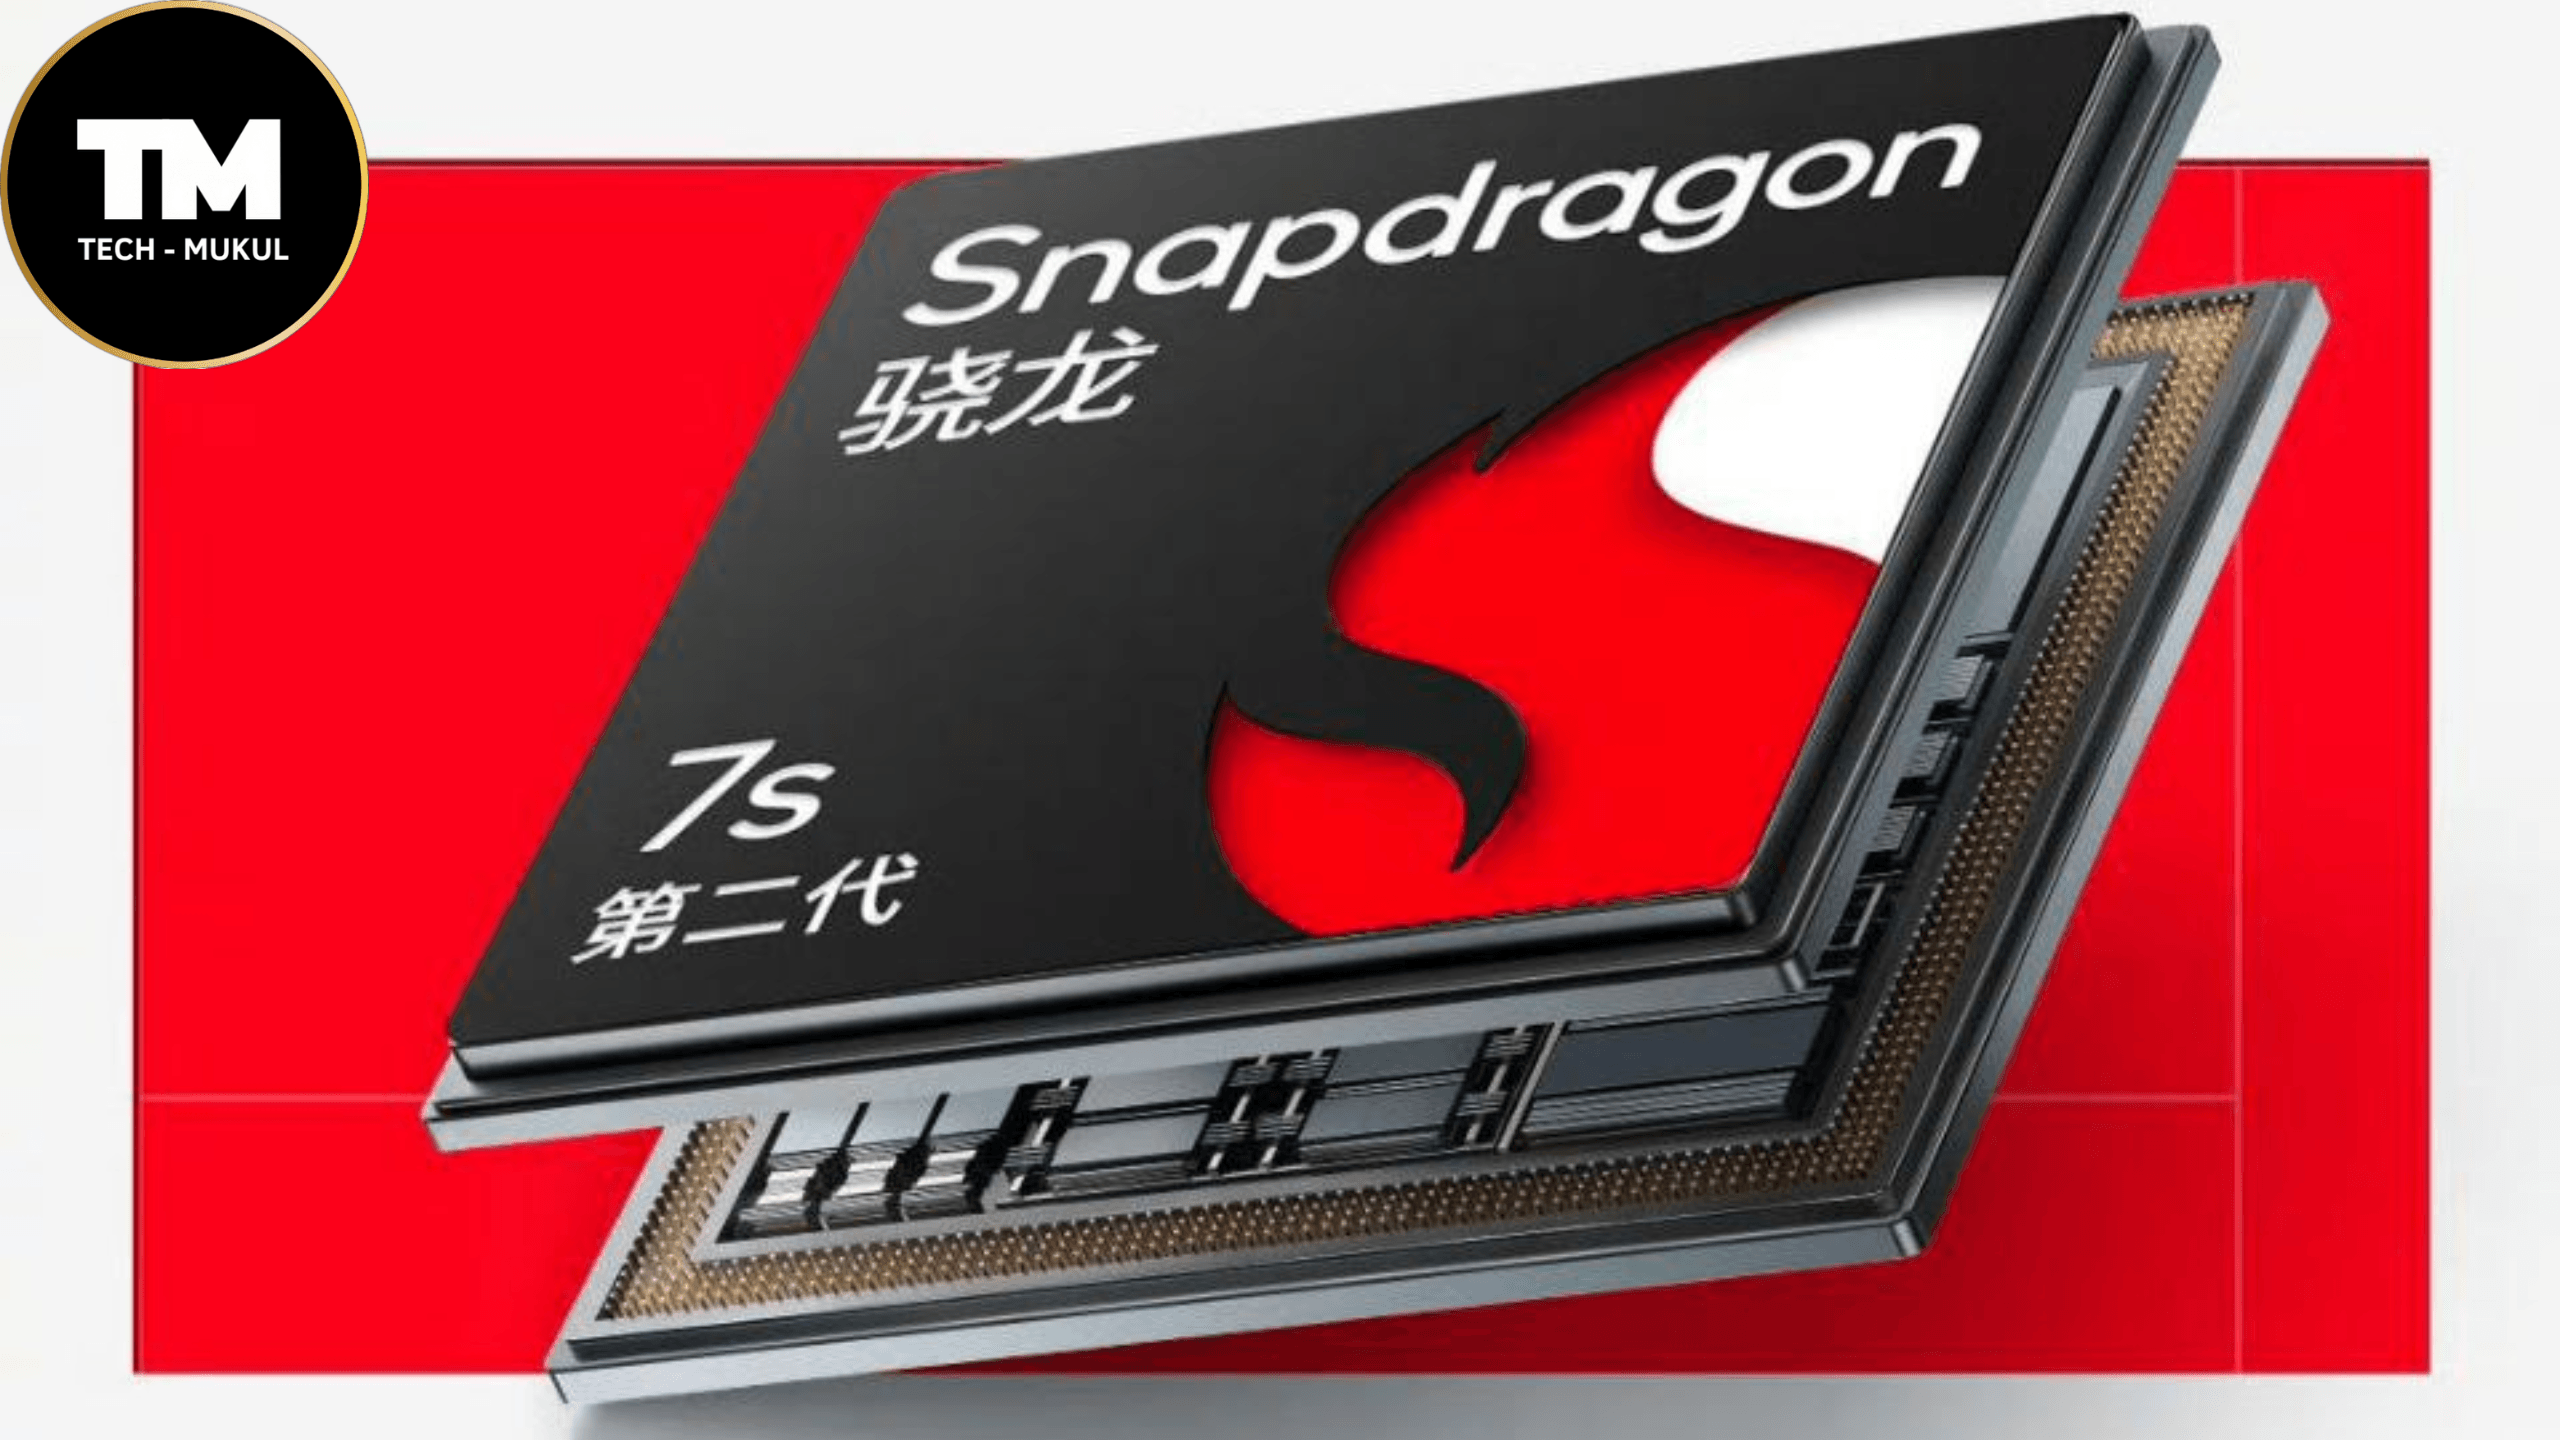 Xiaomi Redmi Note 13 5G series confirmed to launch with Snapdragon